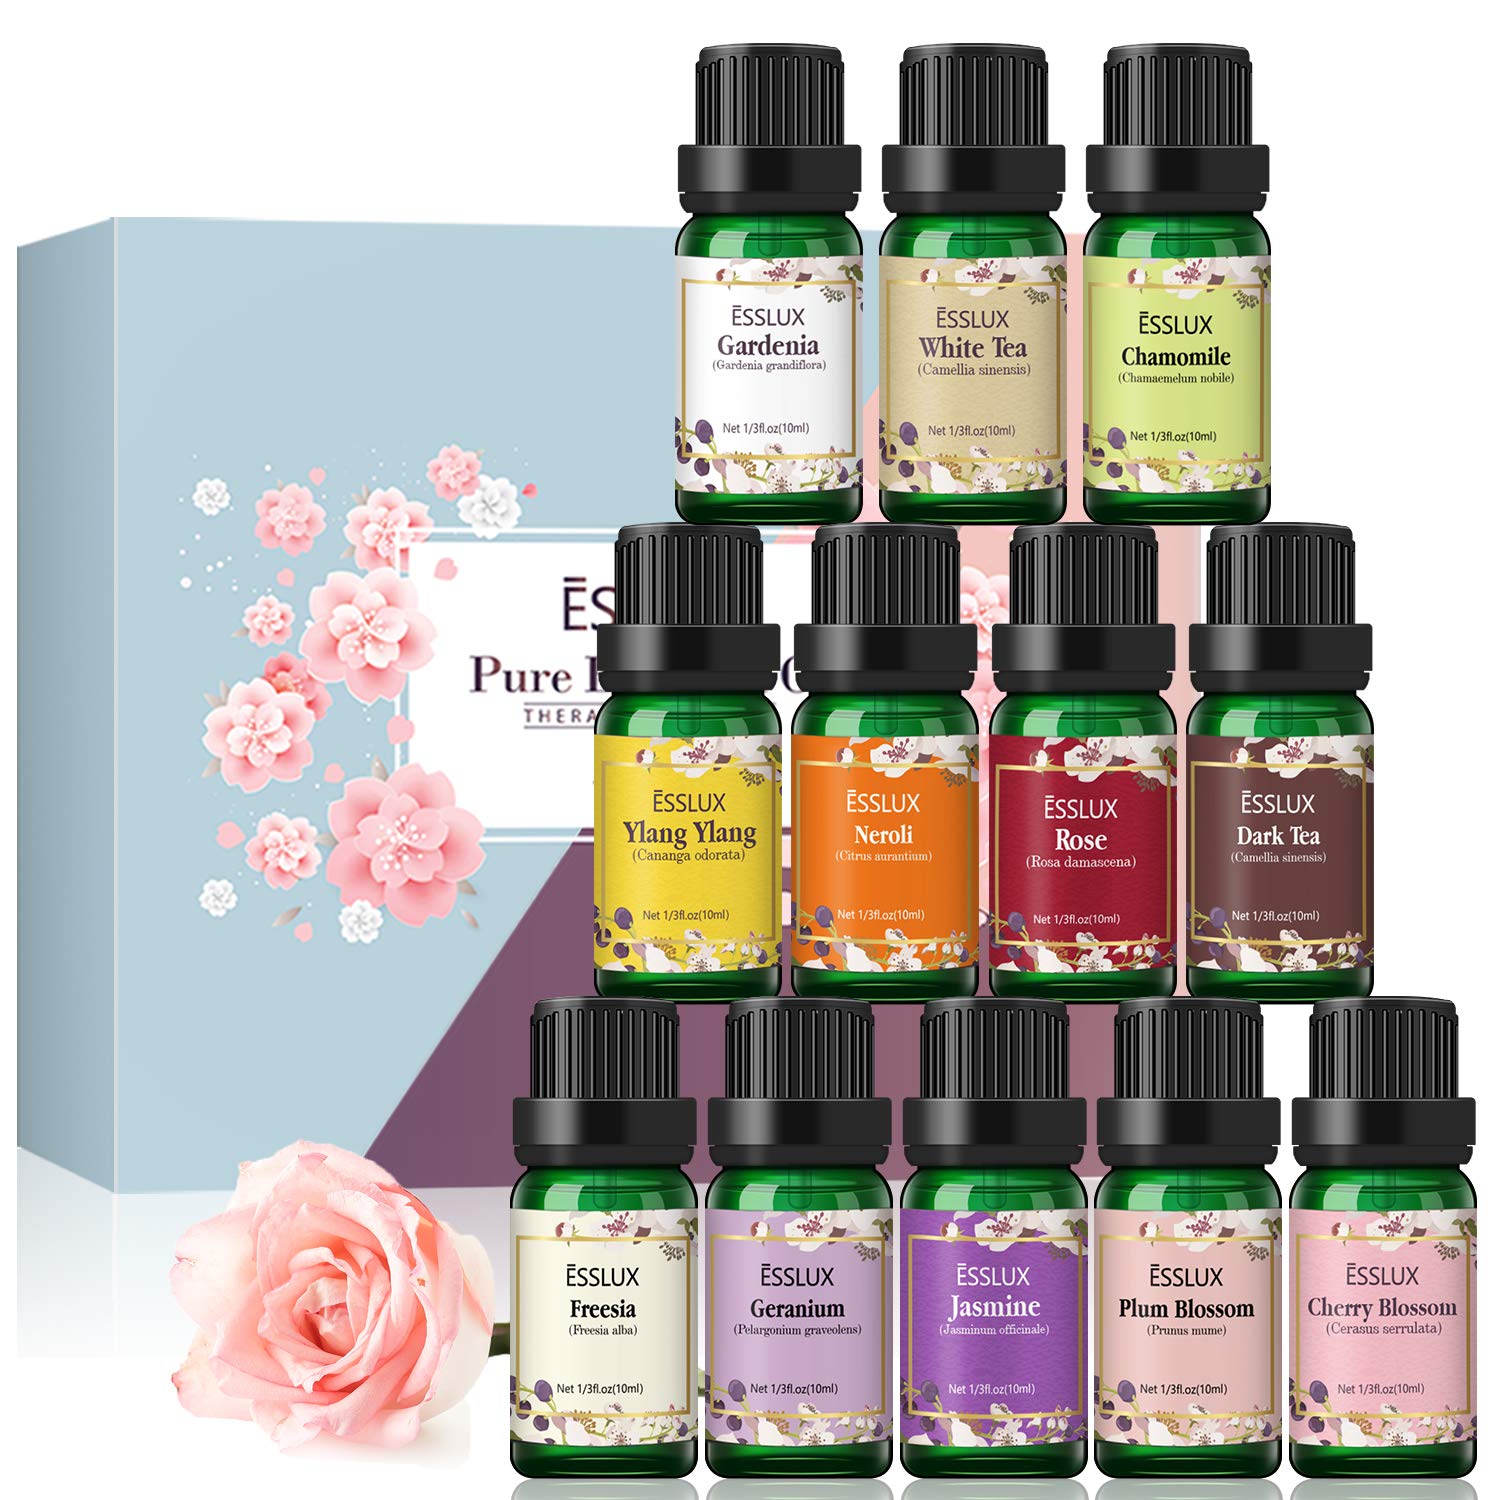 Essential Oils, Esslux Floral Essential Oils Gift Set with Gardenia, Cherry Blossom, Jasmine, White Tea, and More, Pure Aromatherapy Essential Oil for